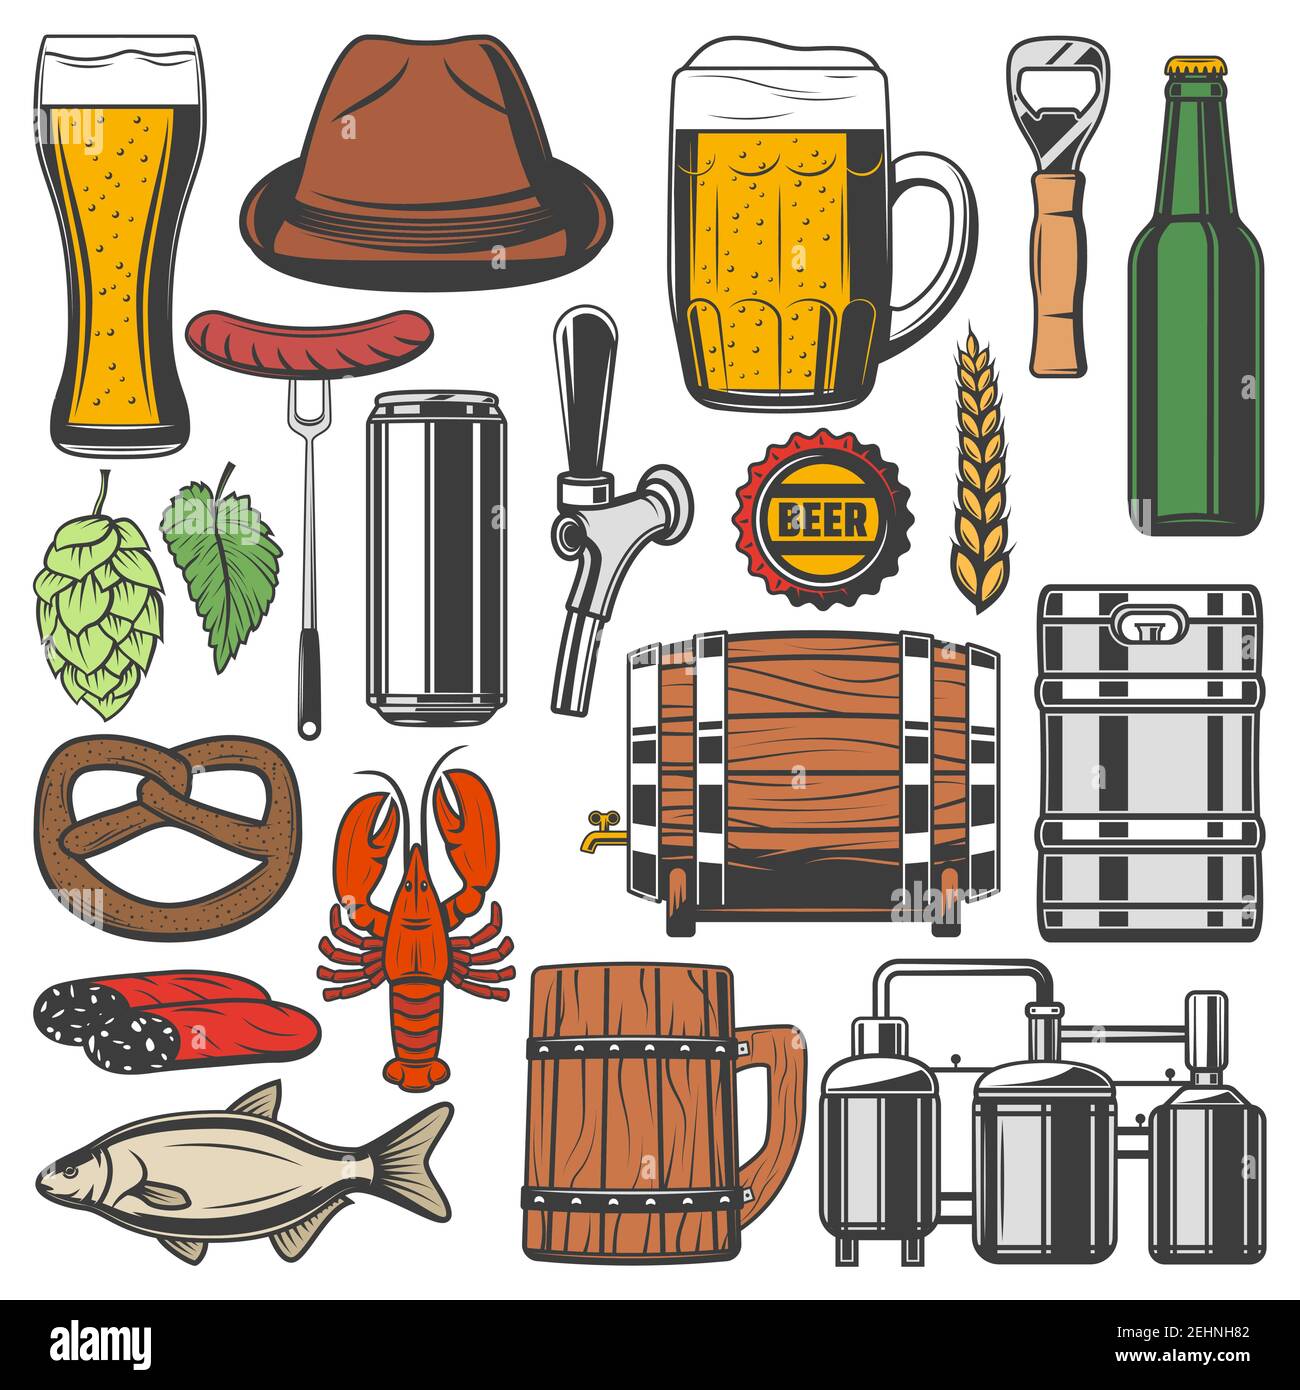 Beer alcohol drink retro icons for bar or pub themes design. Bottle, glass and mug of lager or wheat ale, brewery equipment, hops and barley, wooden b Stock Vector